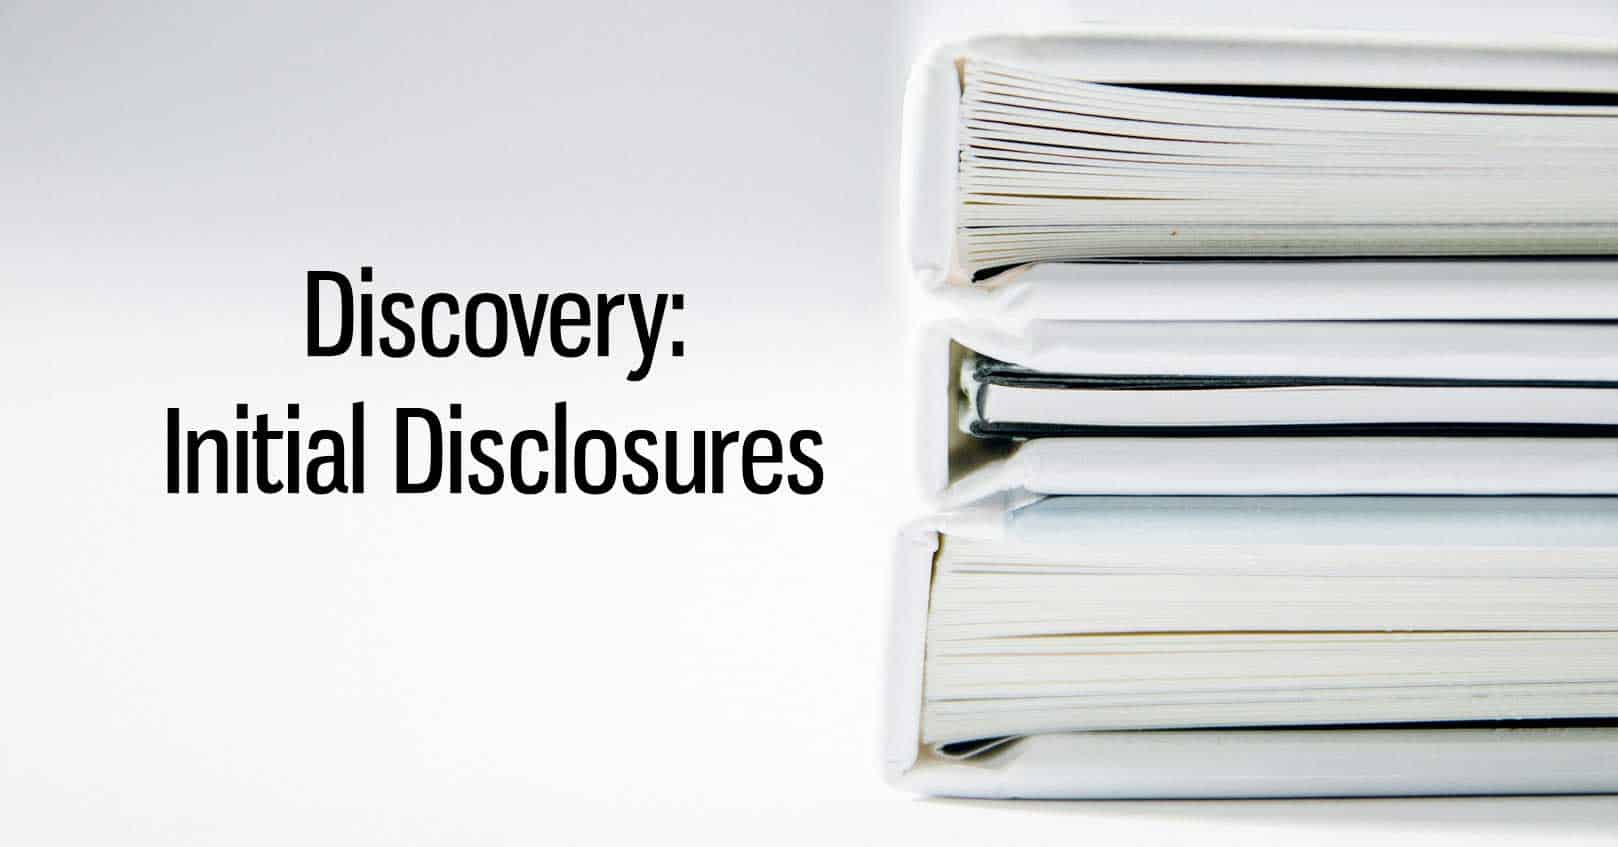 Discovery: Initial Disclosures